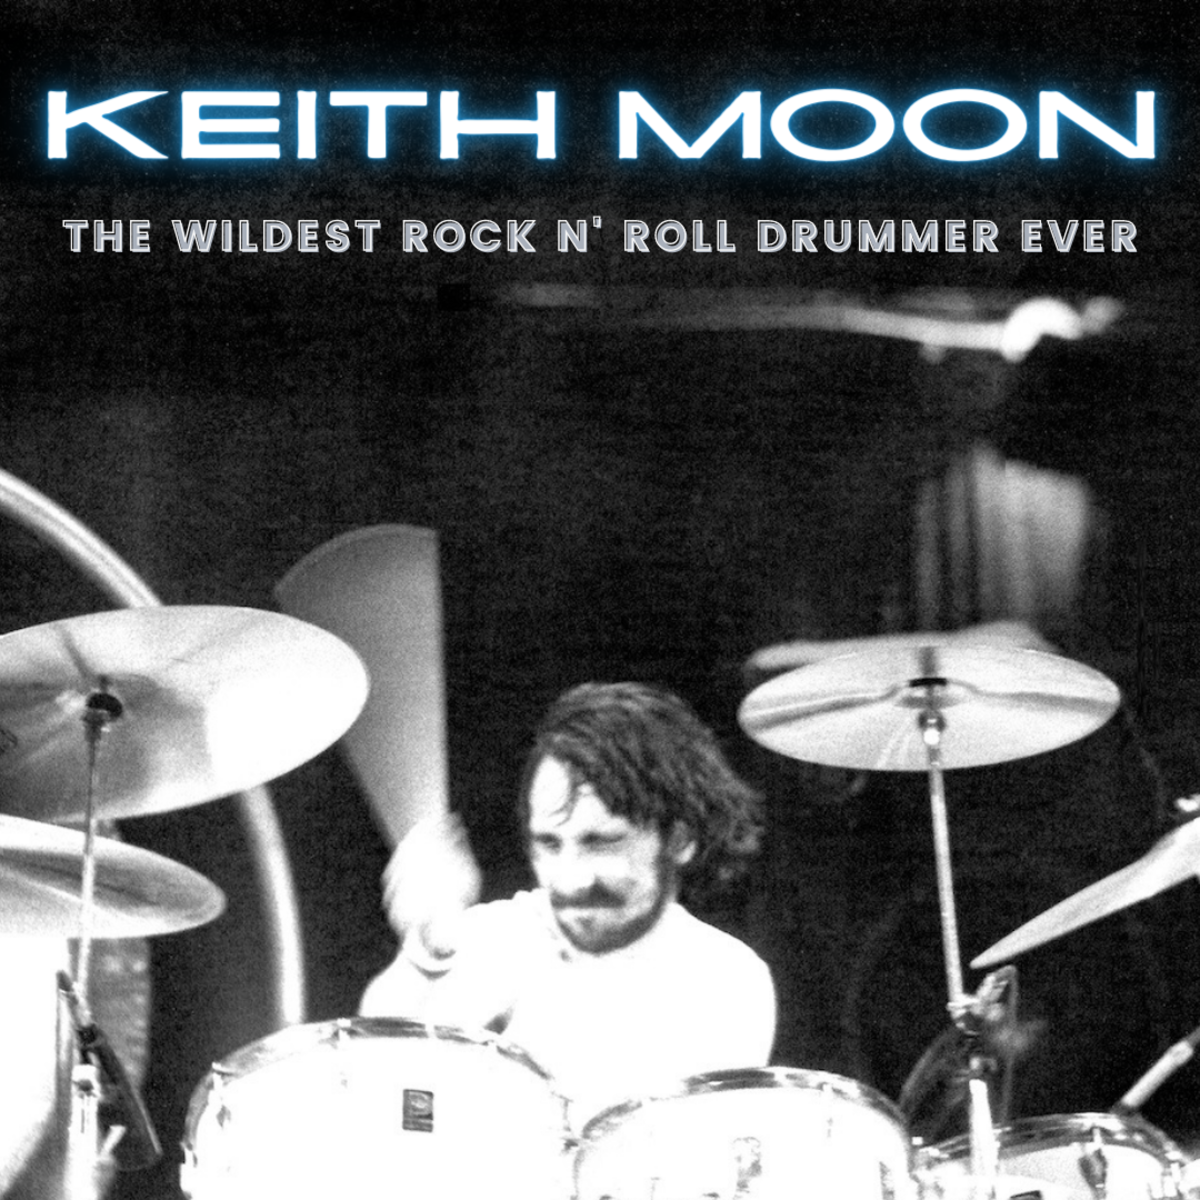 This article will take a look at the wild and wacky life of famous the Who drummer Keith Moon.